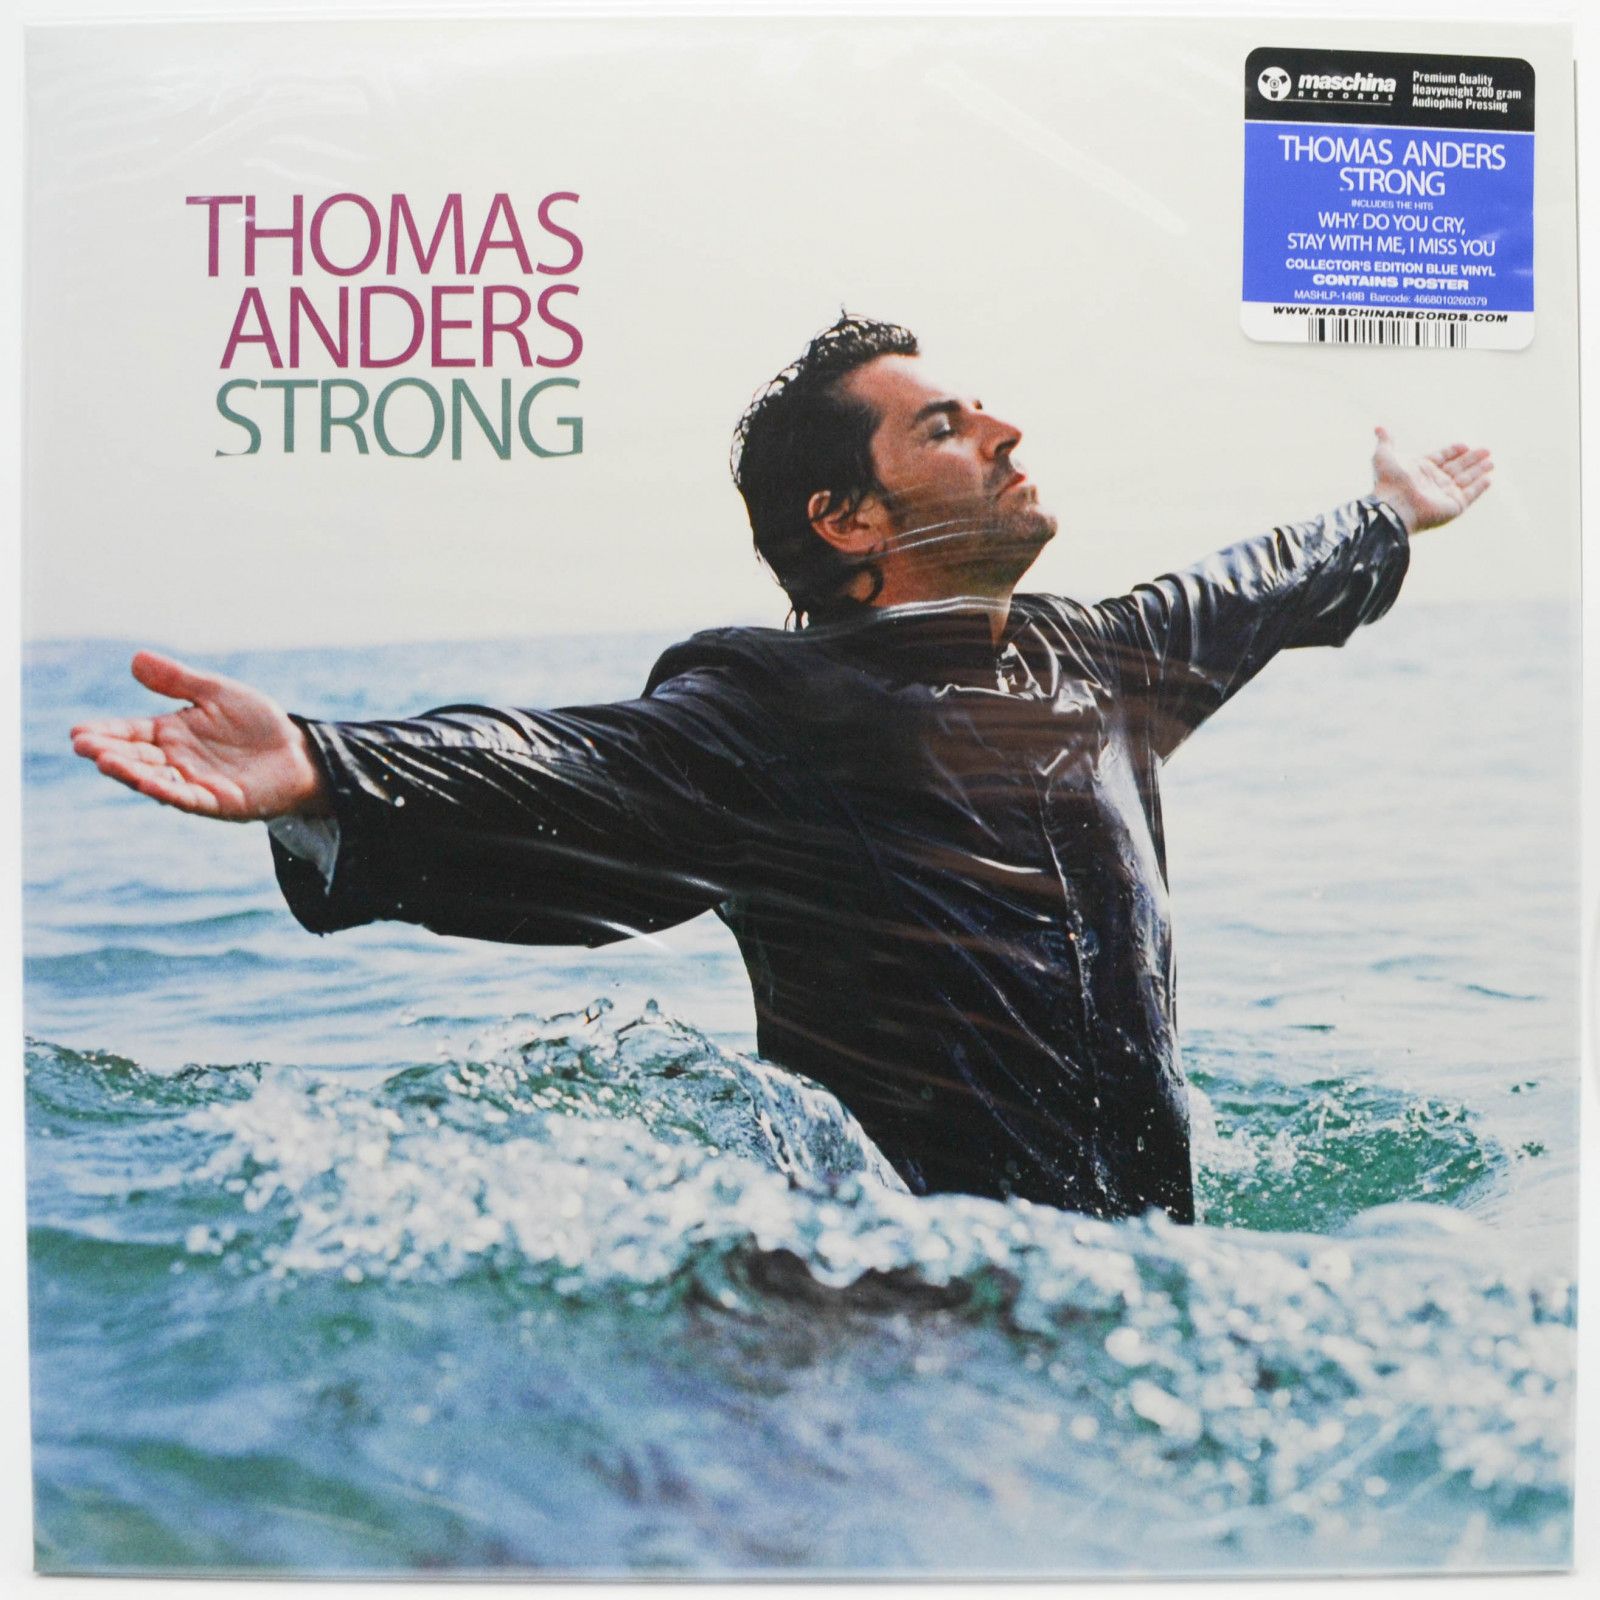 Thomas Anders — Strong, 2010